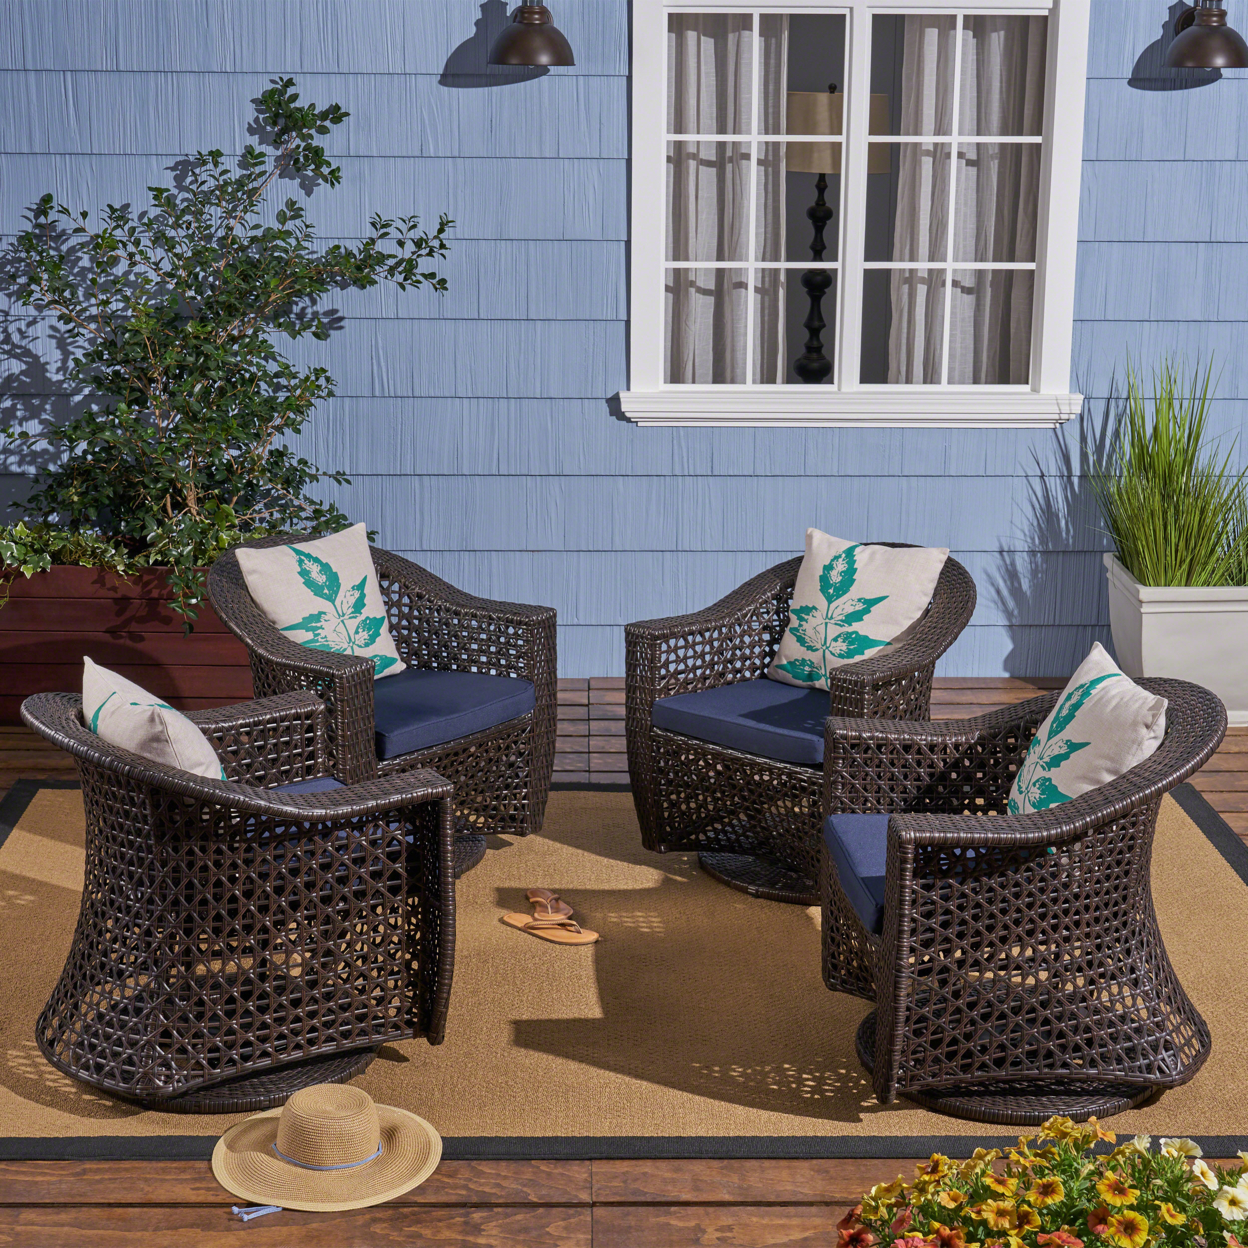 Big Sur Patio Swivel Chair, Wicker With Outdoor Cushions, Multi-Brown, Navy Blue - Set Of 4